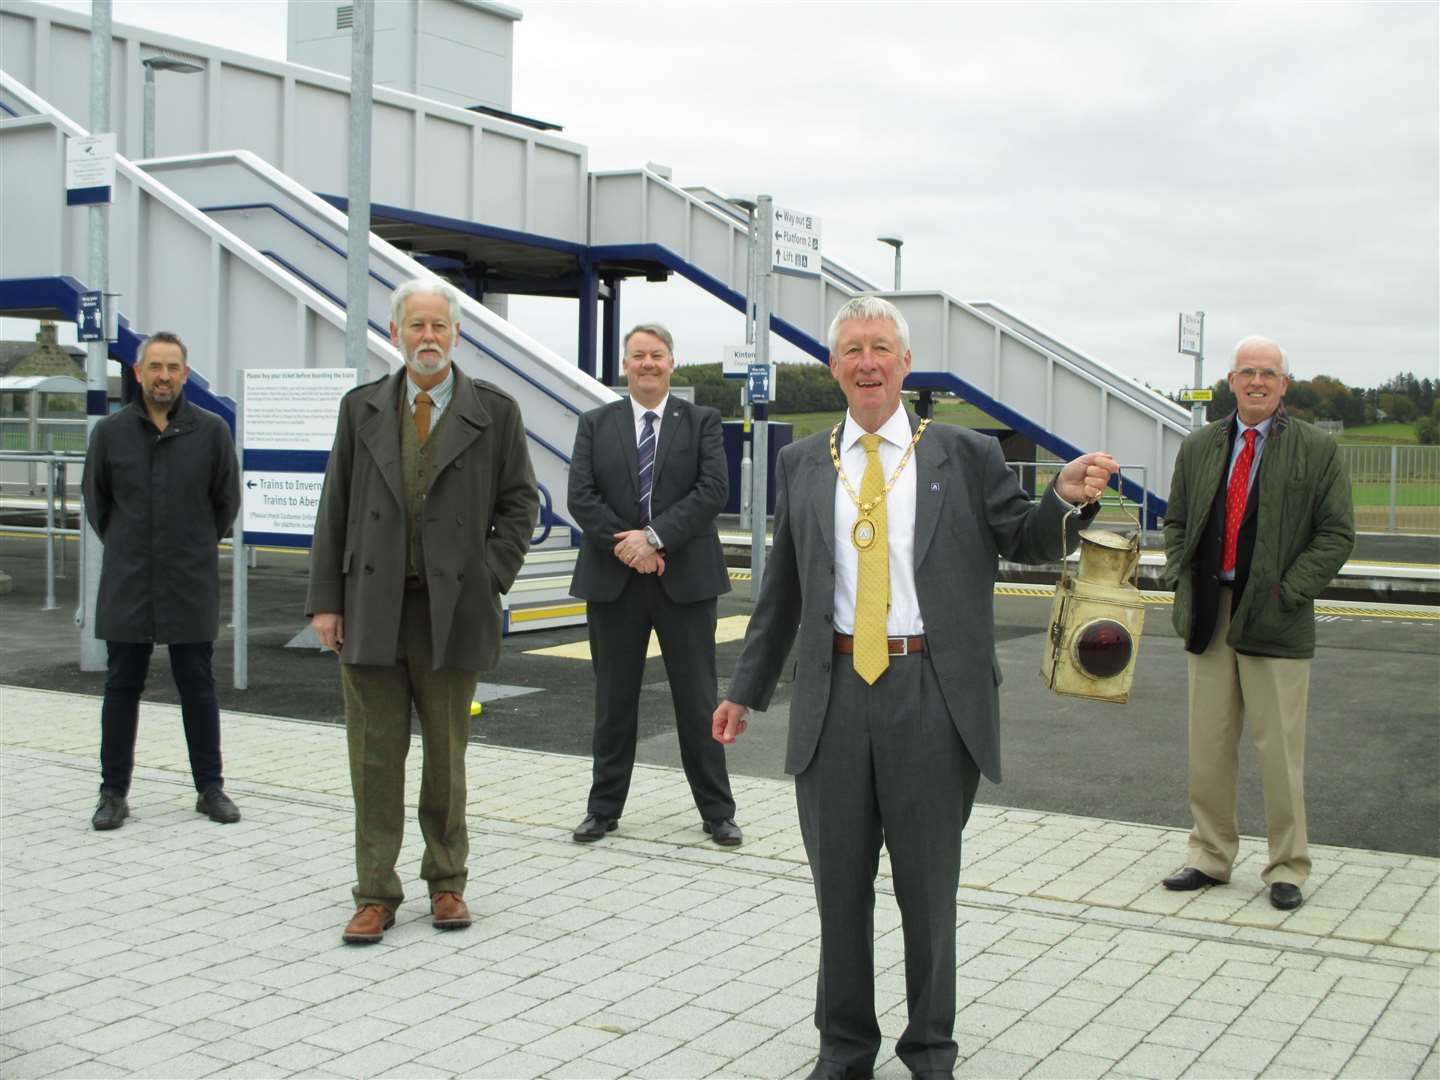 Councillors and representatives from groups attended an informal tour of the new Kintore railway station.